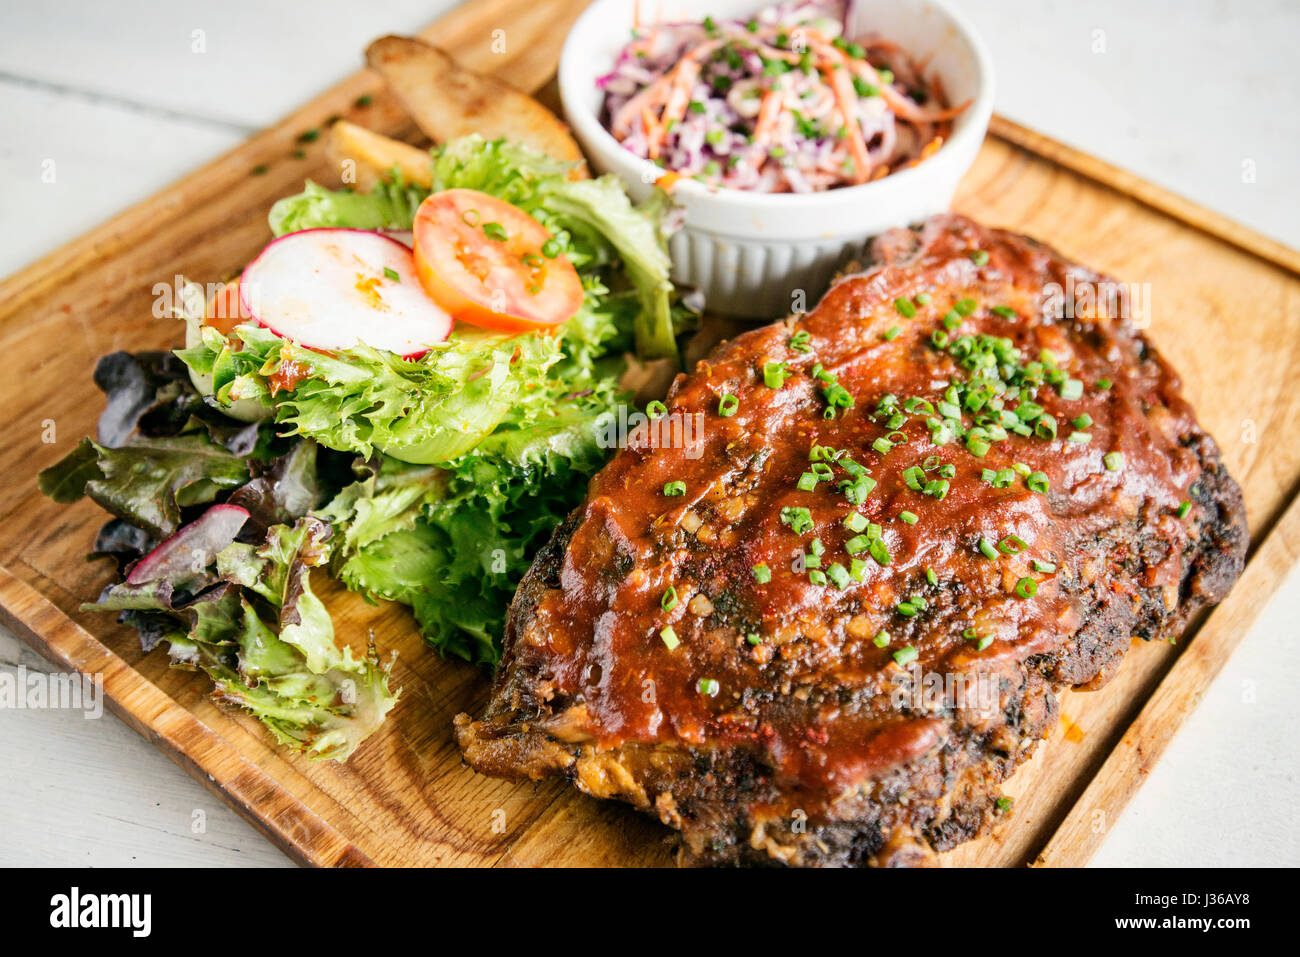 pork bbq ribs with  coleslaw and salad set meal Stock Photo